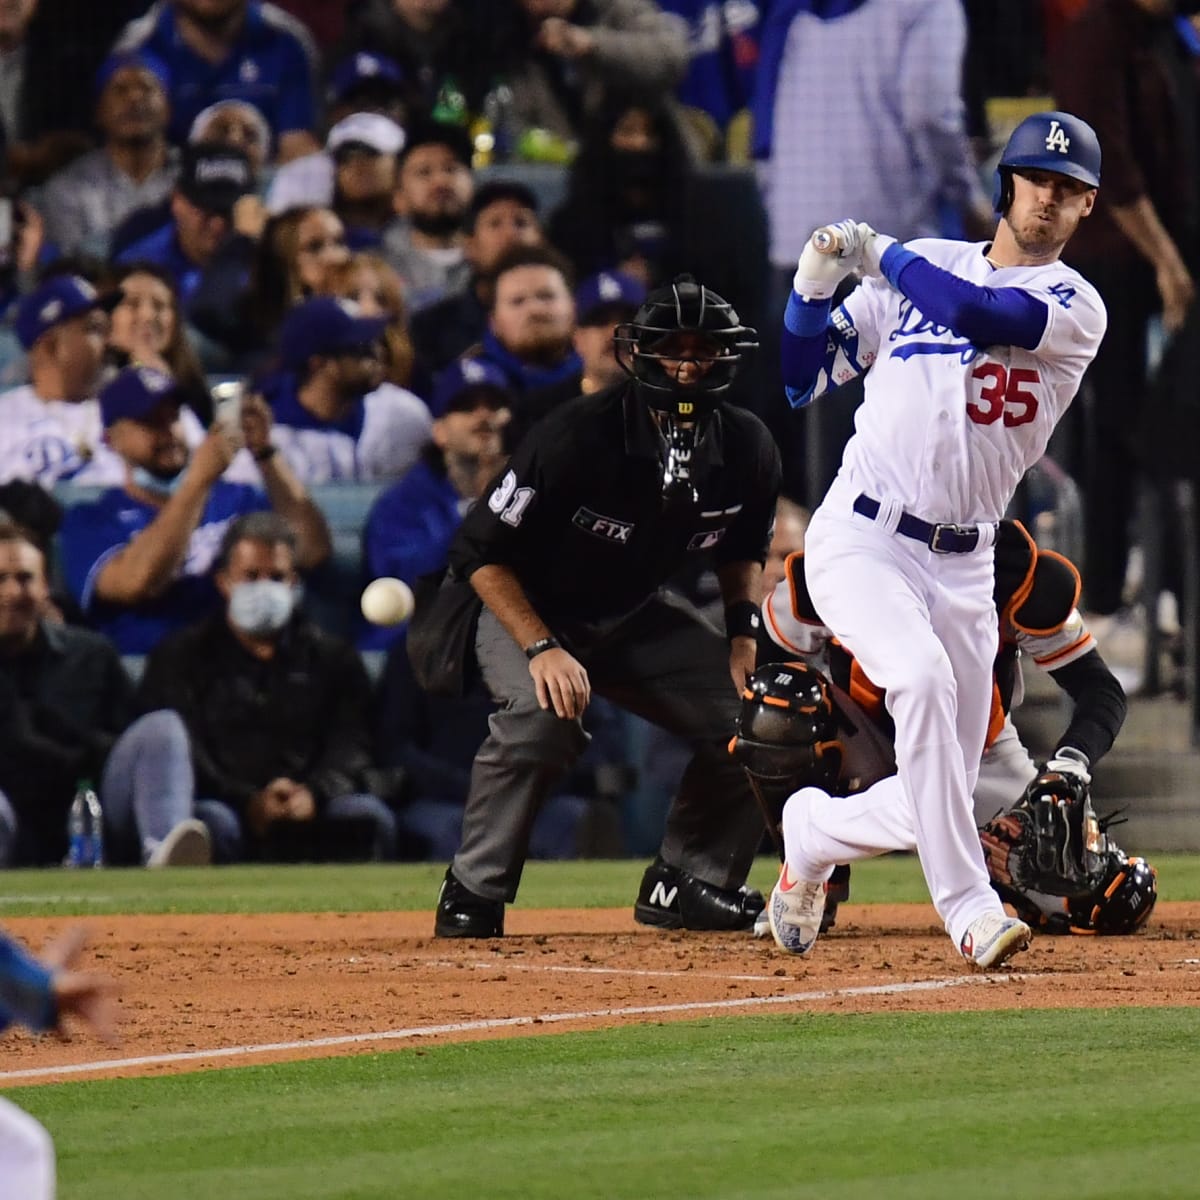 Los Angeles Dodgers: Cody Bellinger is unstoppable again